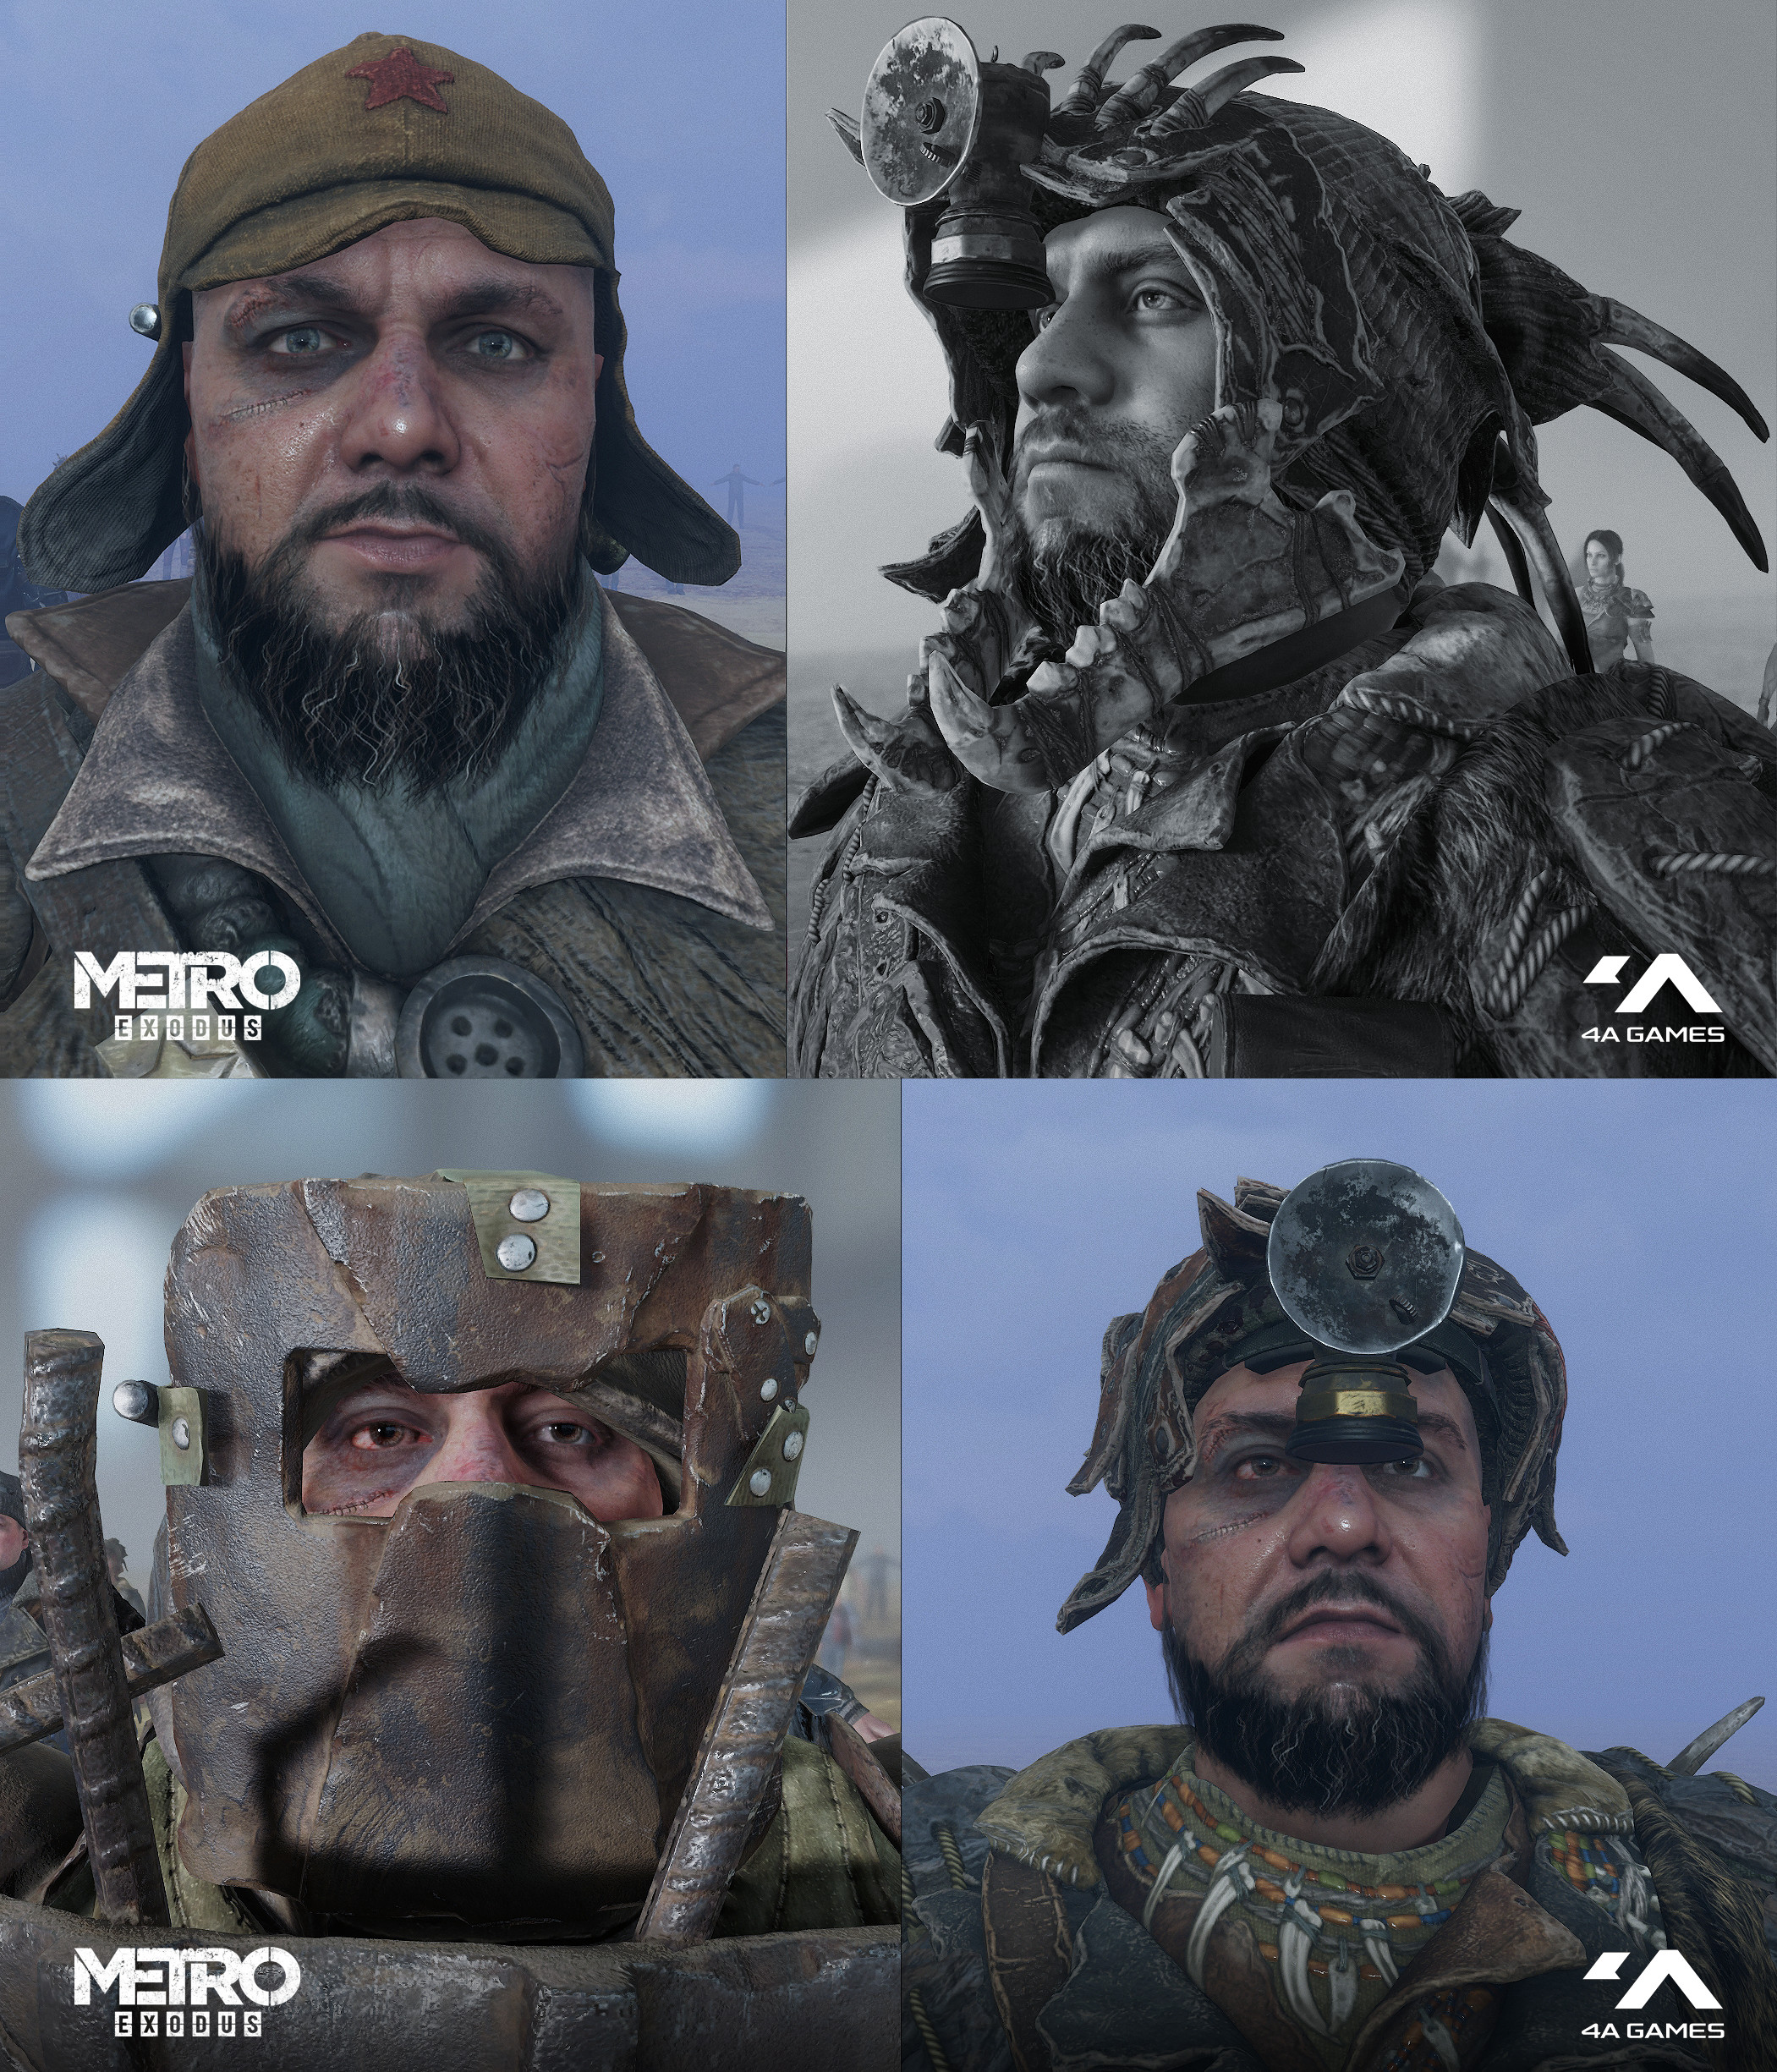 This face texture set or mesh, or whole head you can see in the game on different characters